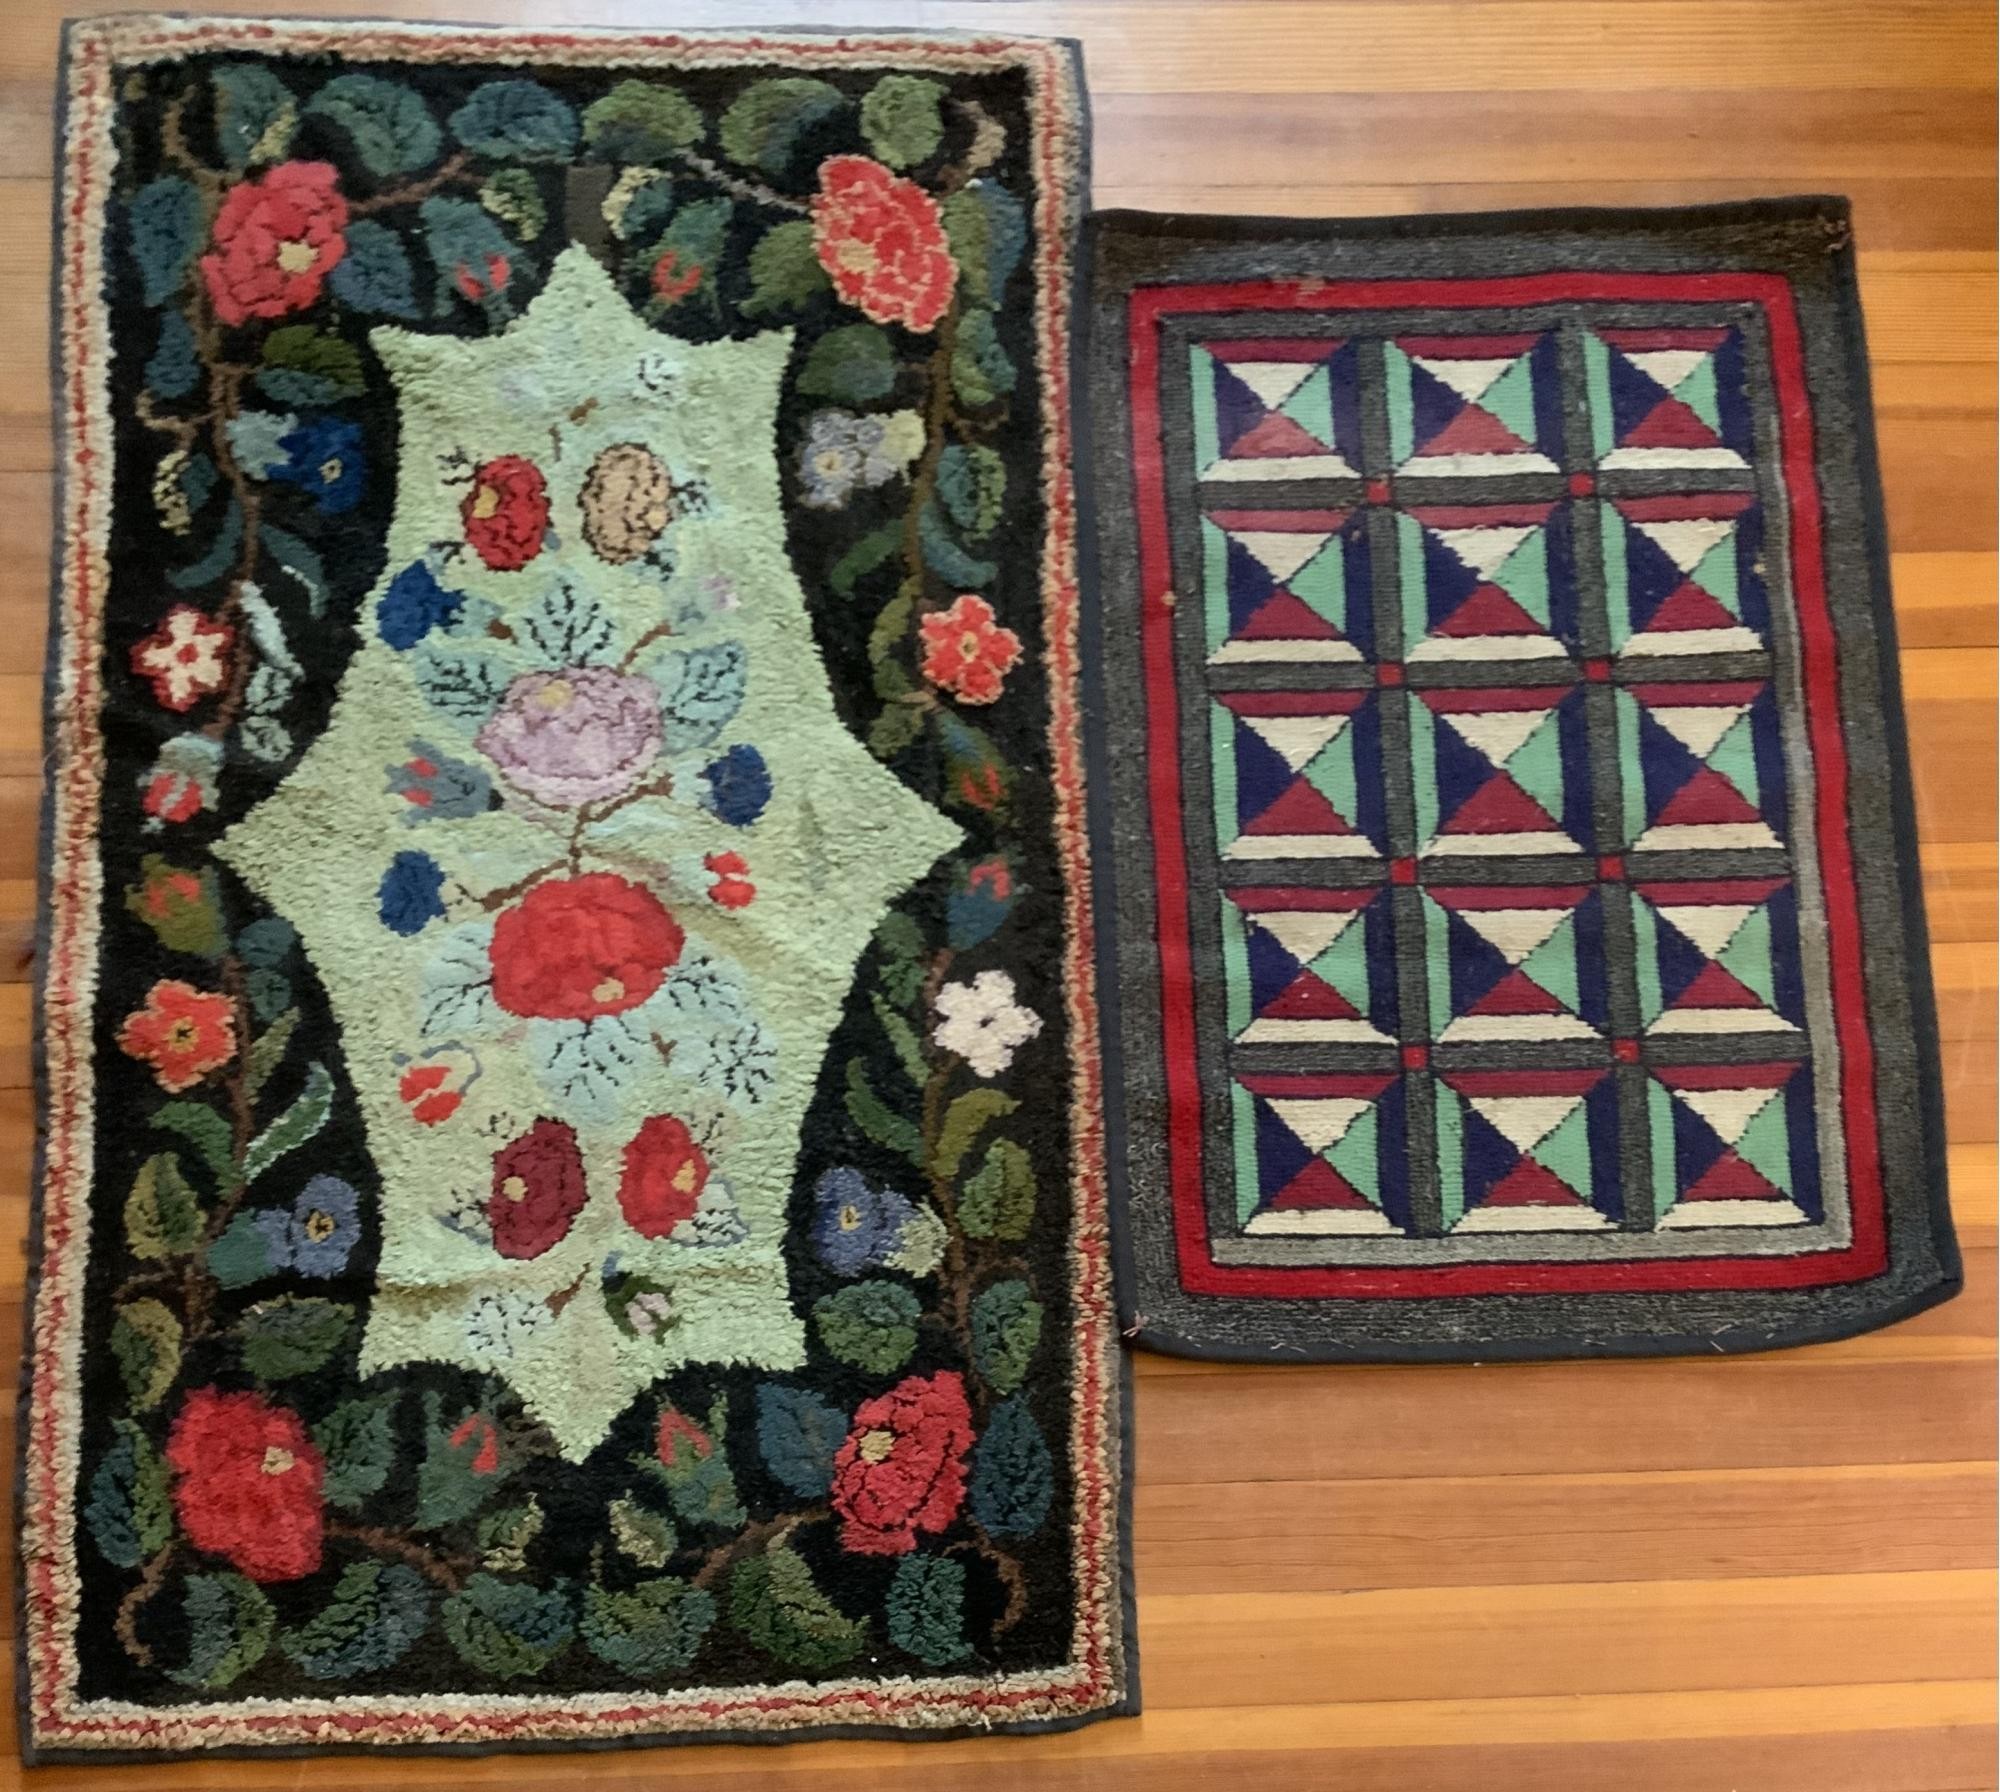 TWO ANTIQUE HOOKED RUGS. A small